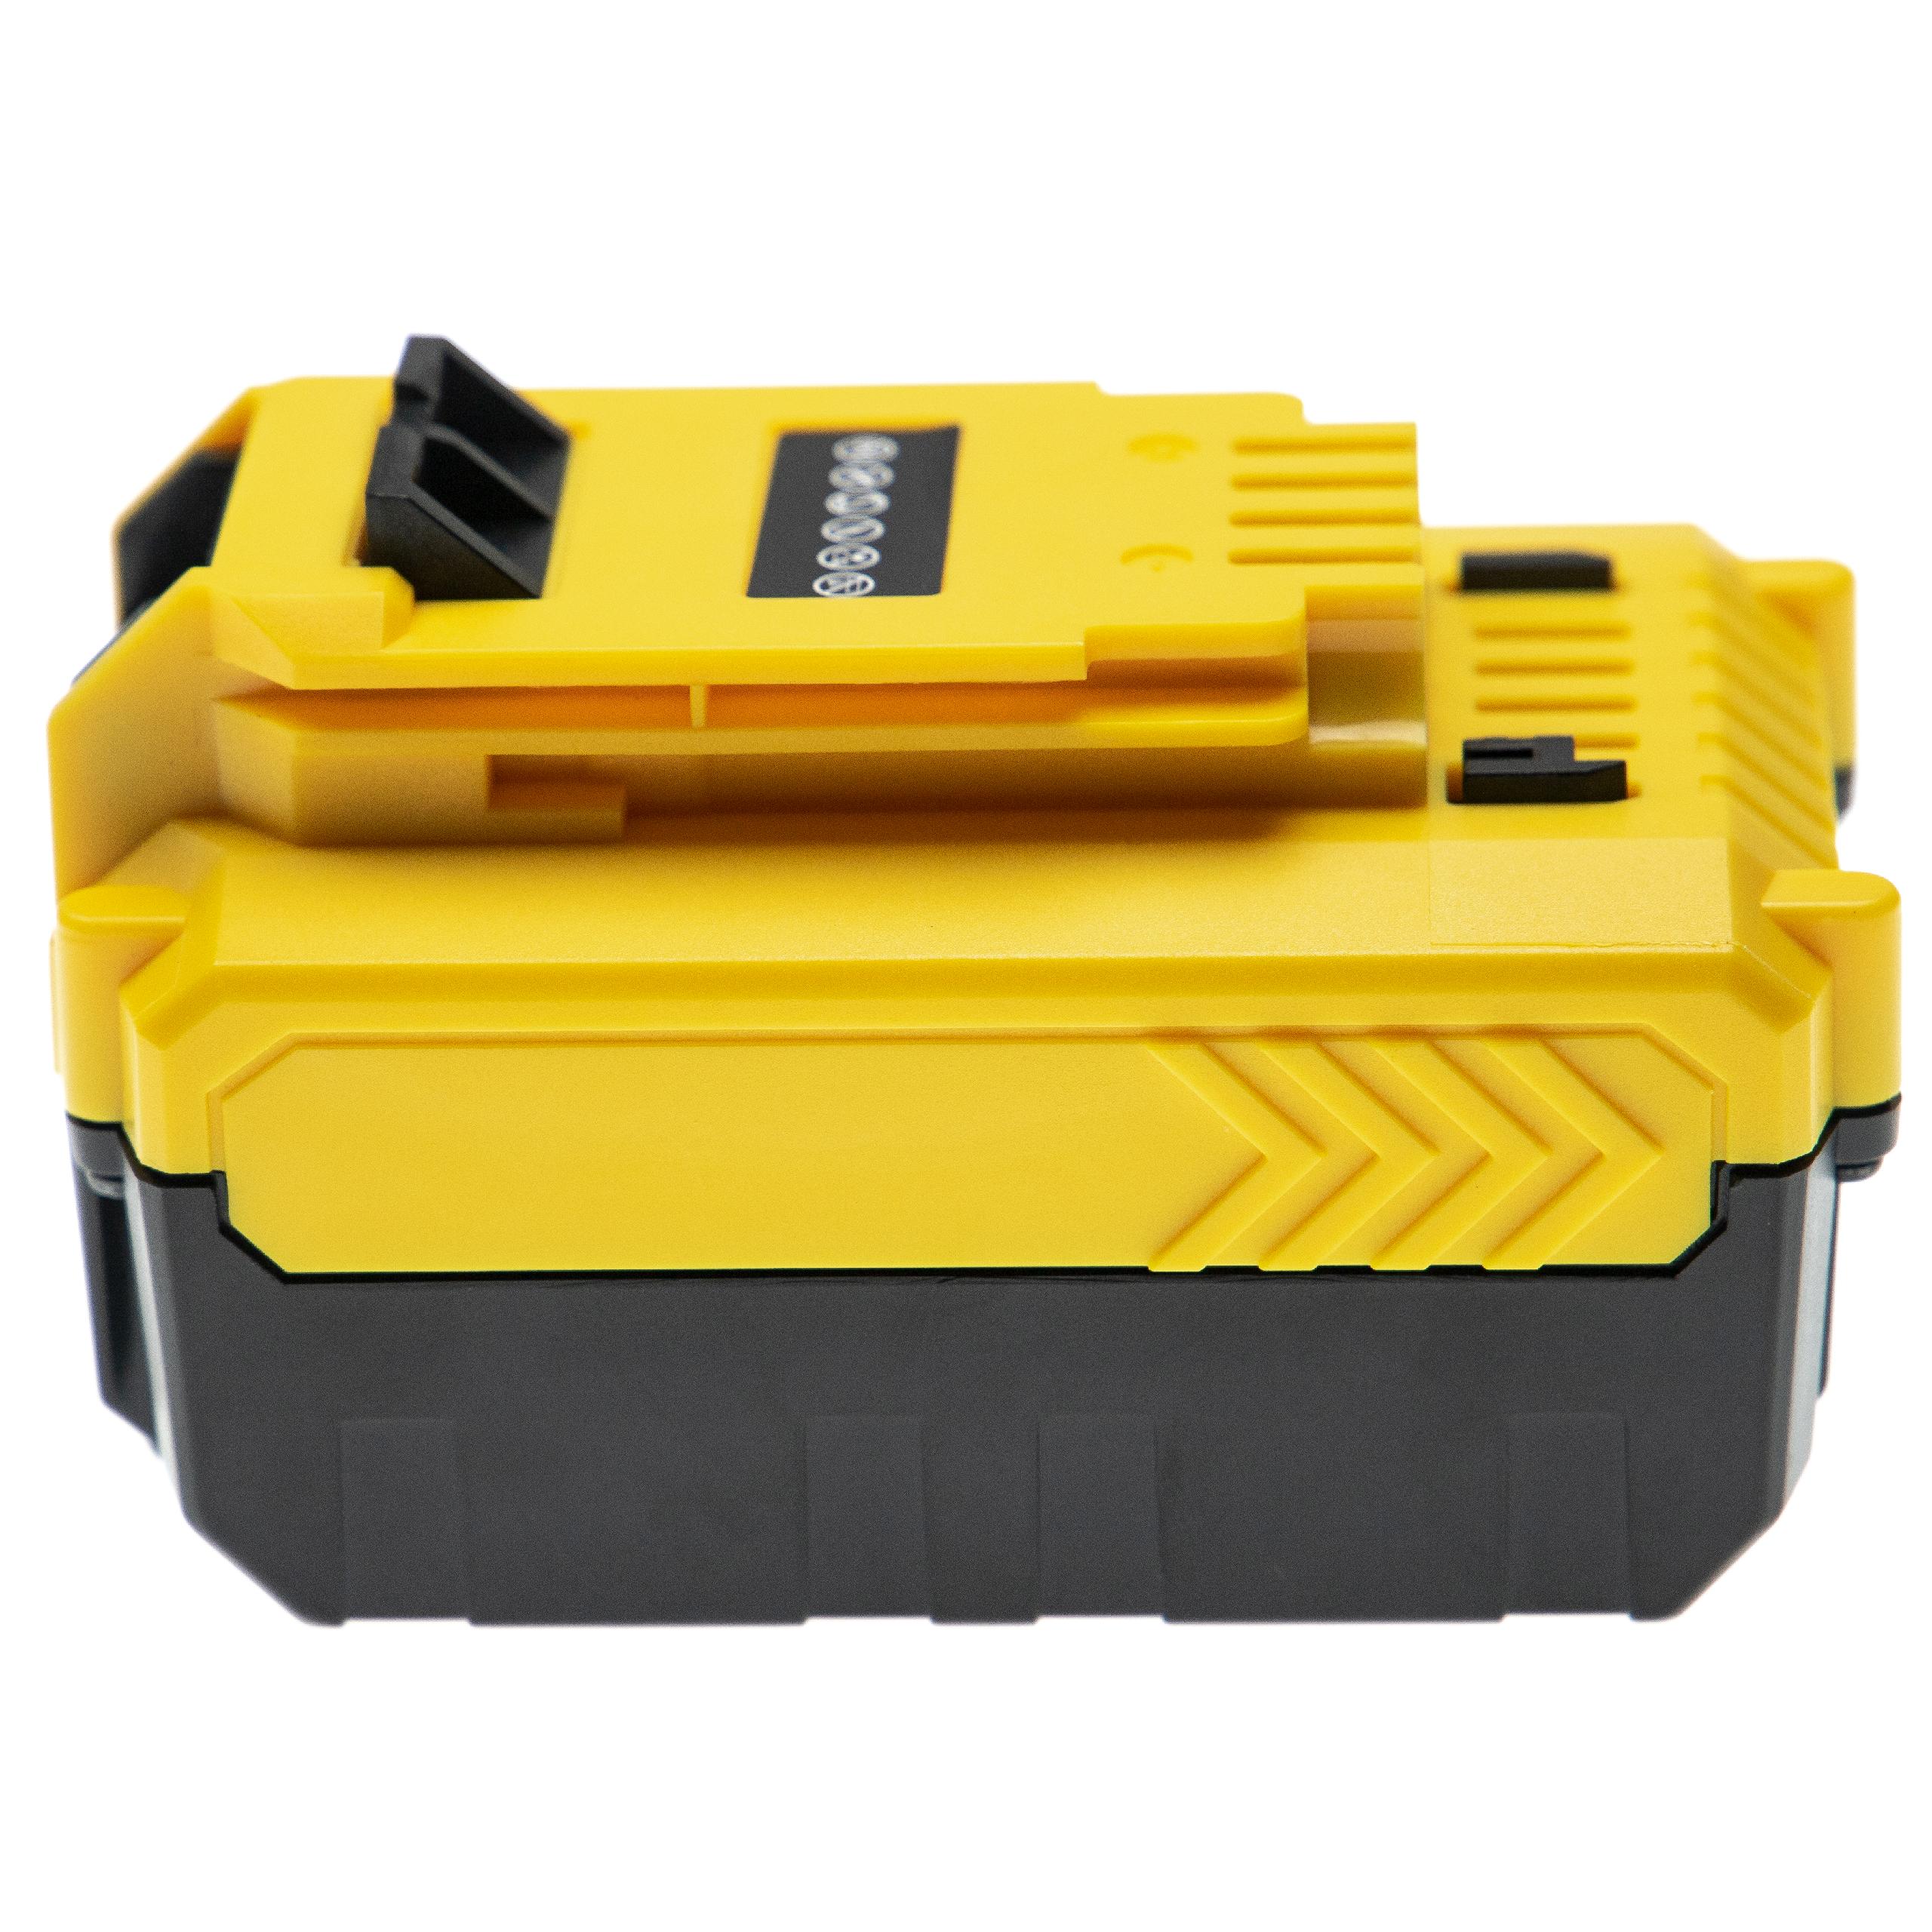 Electric Power Tool Battery Replaces Stanley FMC687L - 5000 mAh, 18 V, Li-Ion